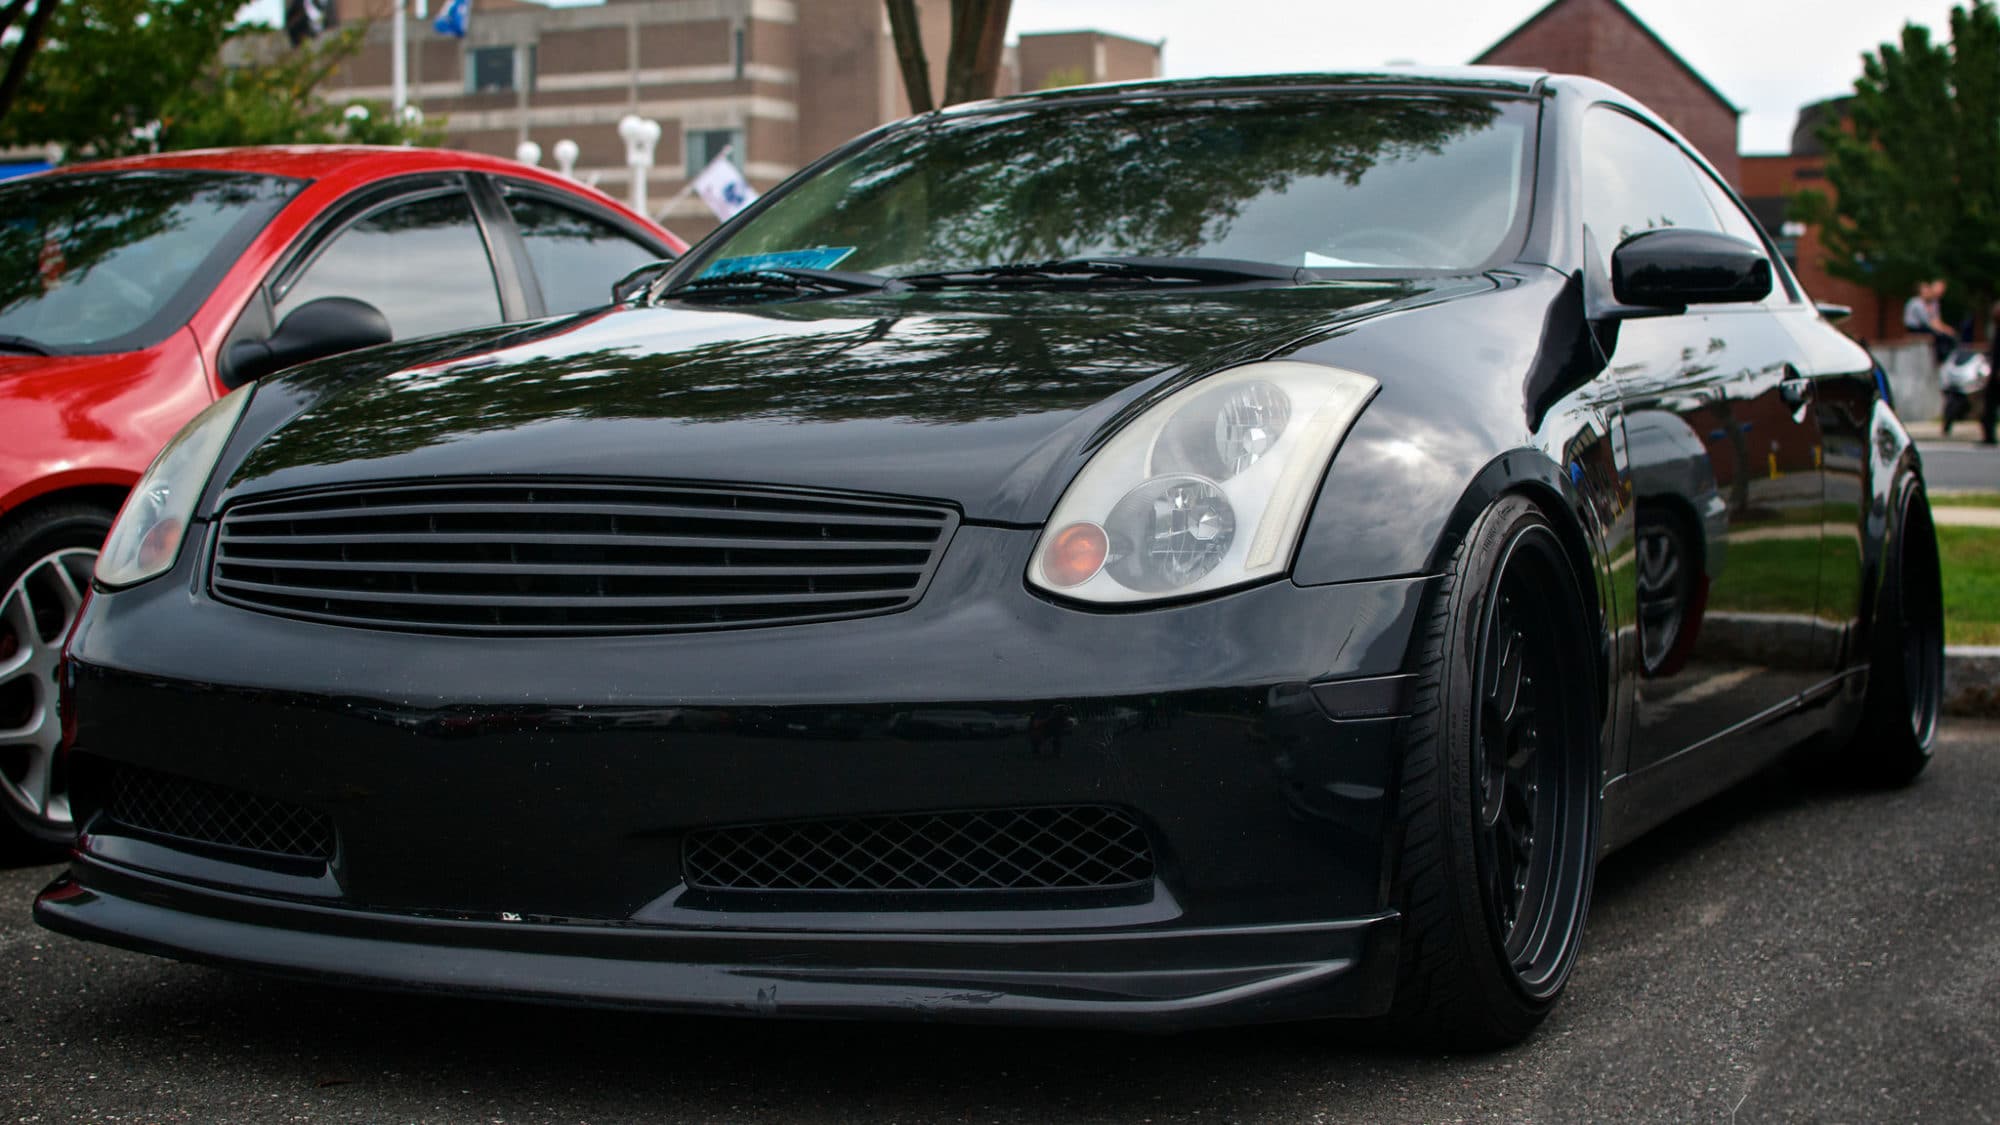 The Best Infiniti G35 Mods for Coupe & Sedan | Low Offset